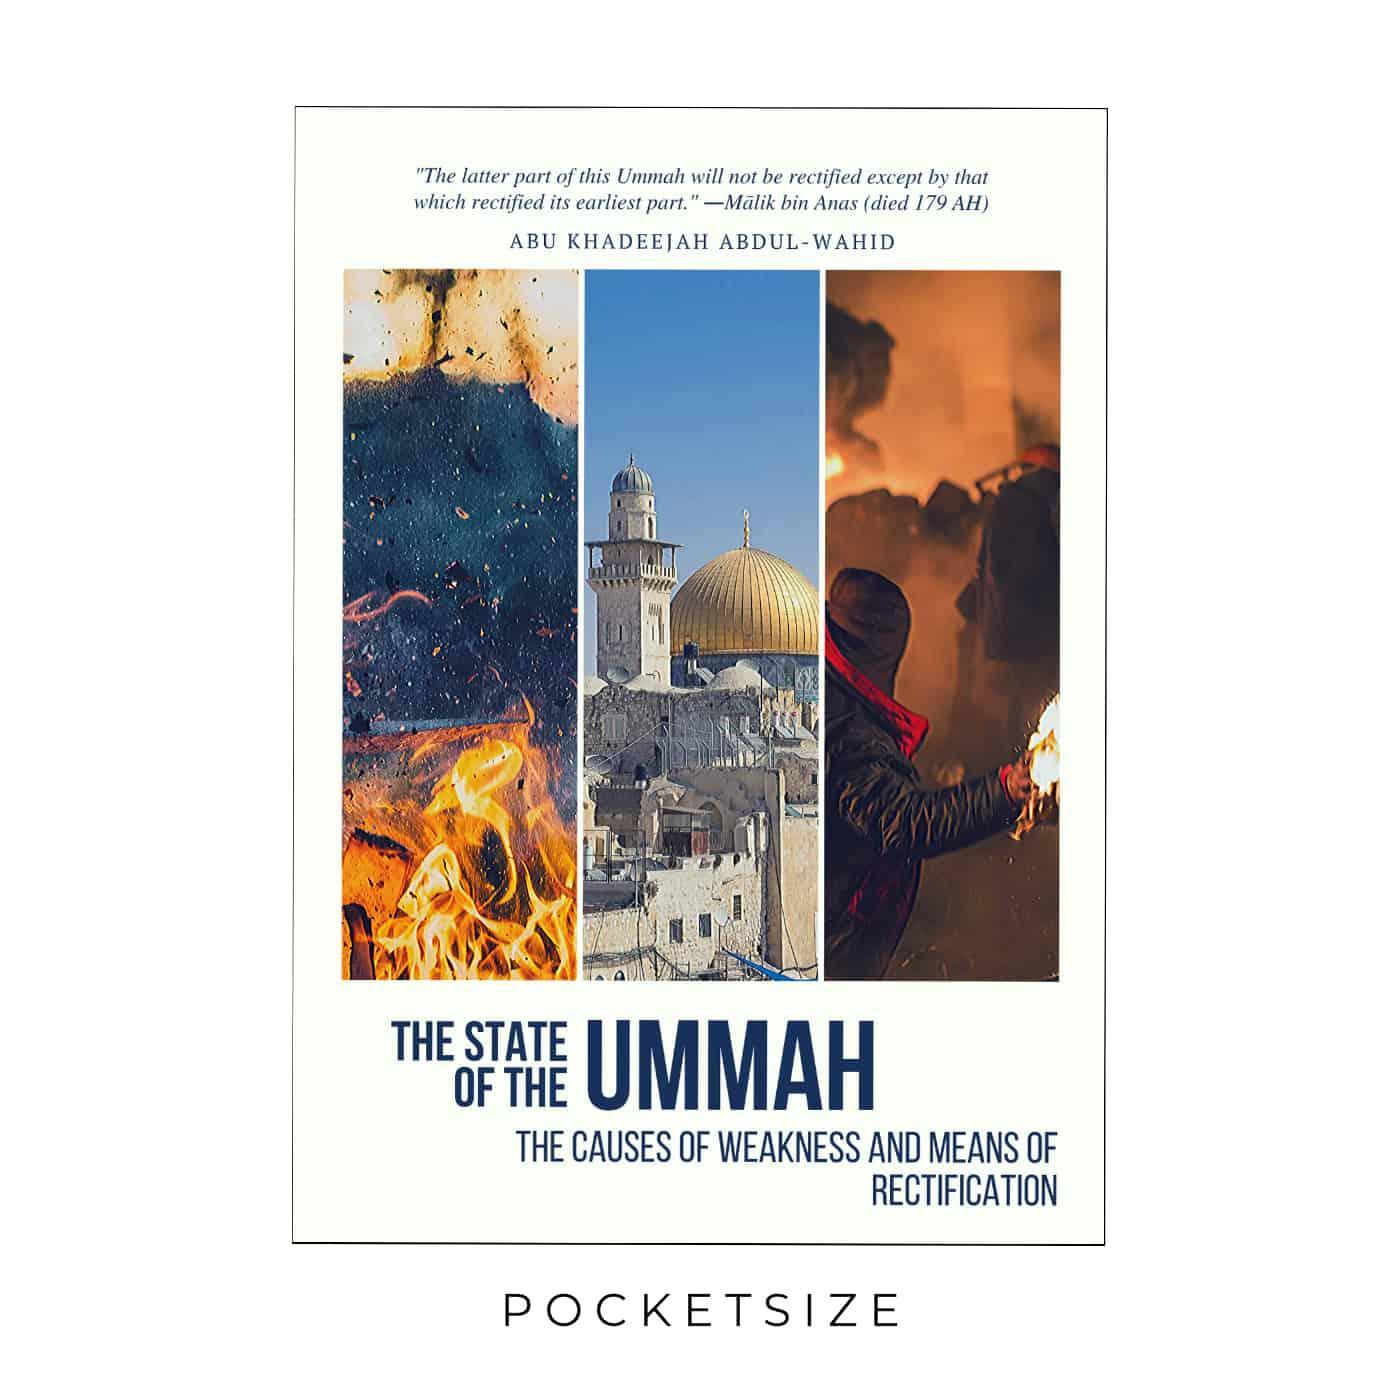 The State Of The Ummah - The Causes Of Weakness And Means Of Rectification